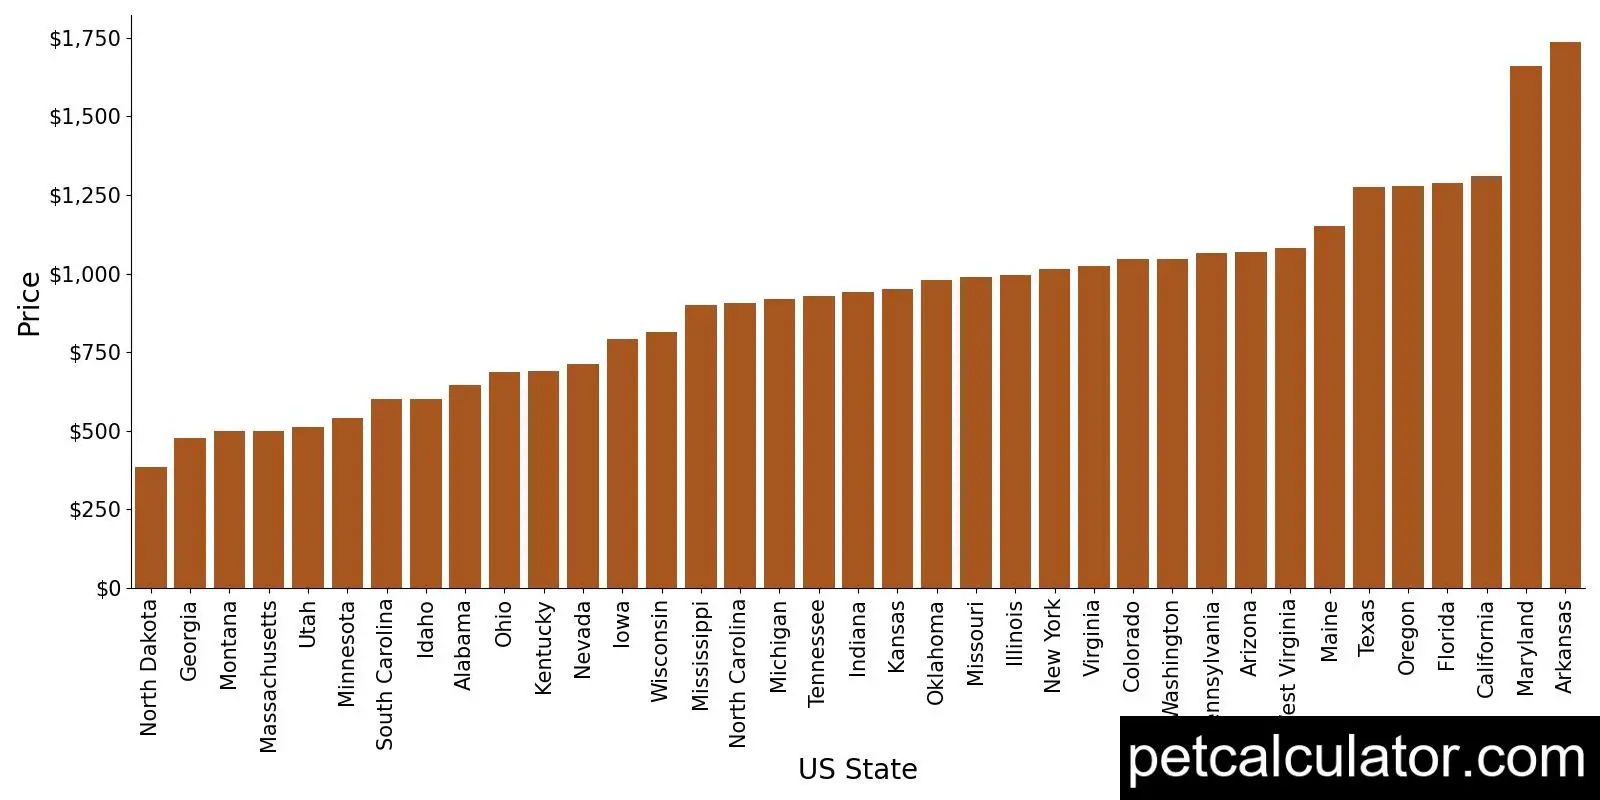 Price of Border Collie by US State 